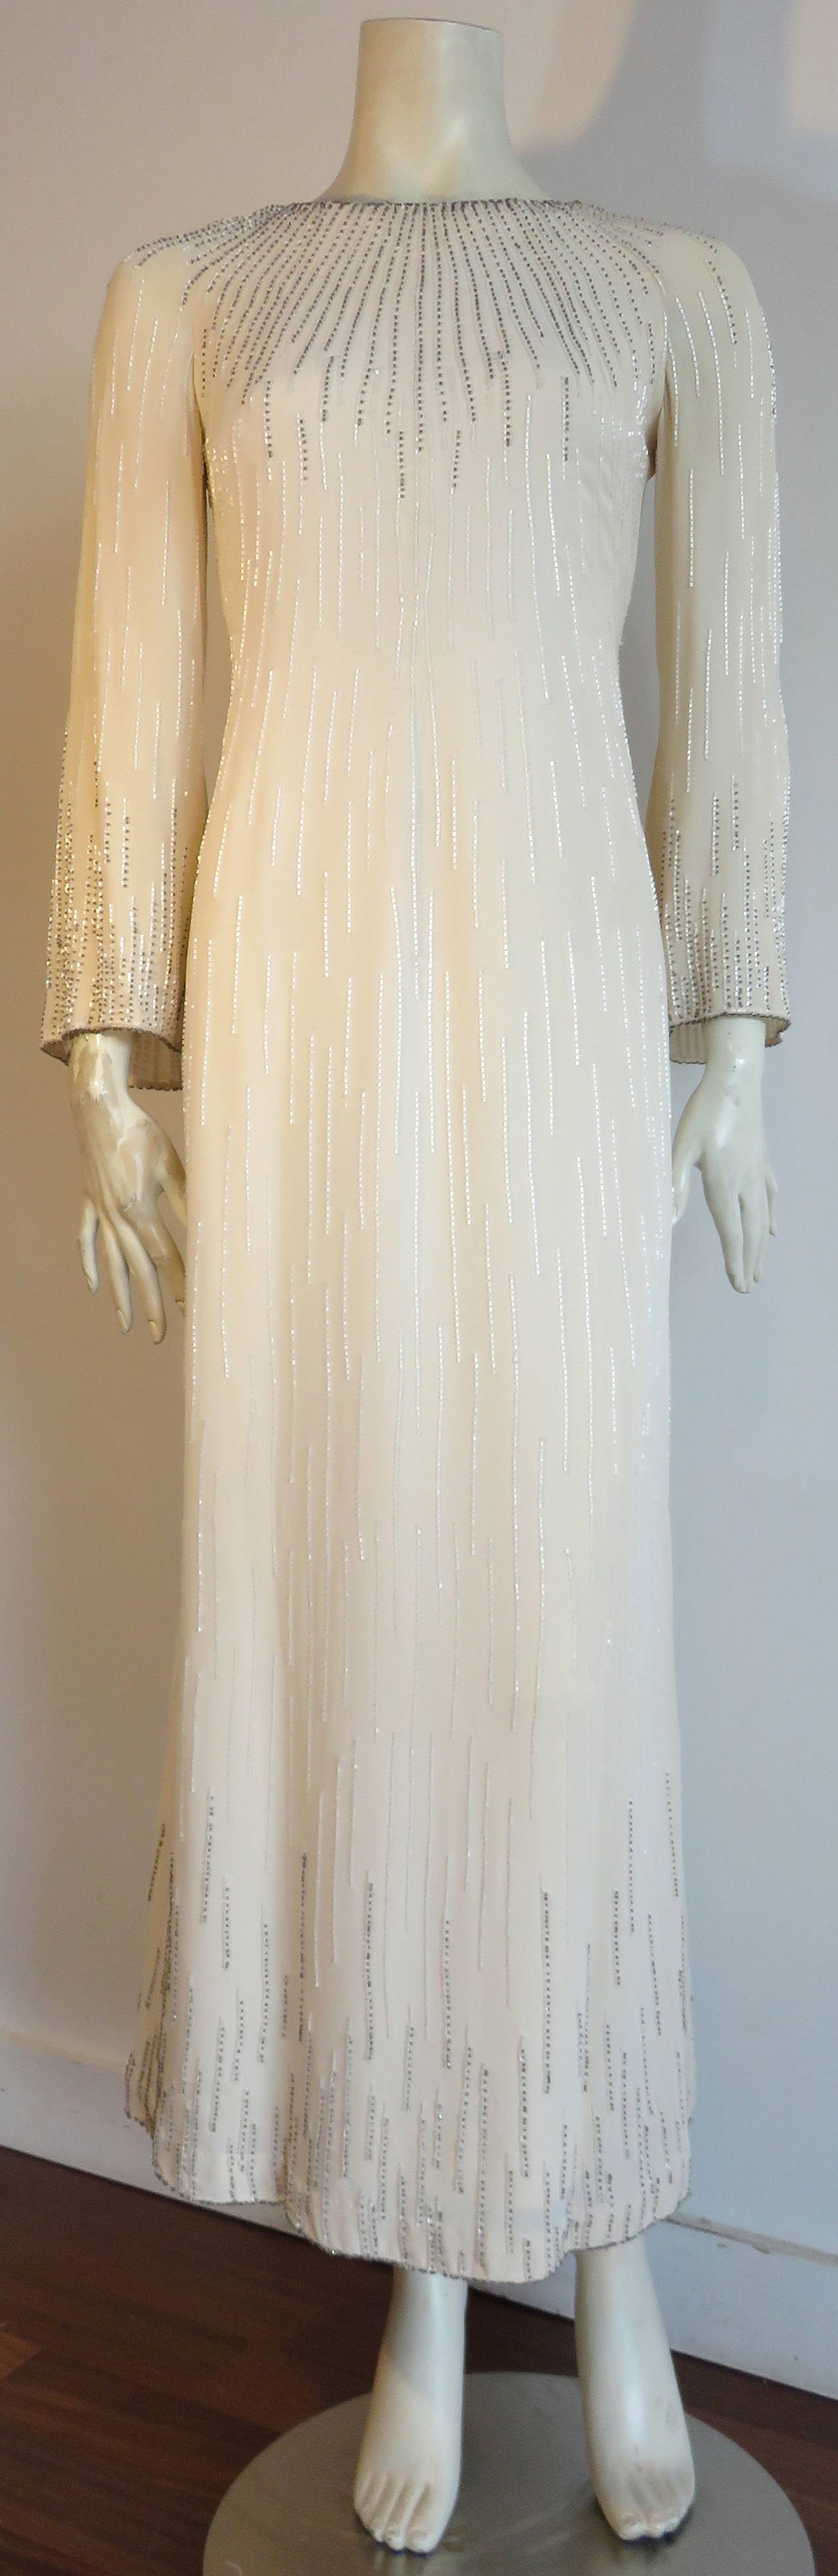 Excellent condition, 1970's GUY LAROCHE Haute Couture beaded evening gown dress.

This stunning dress is made of pure, light creme/ecru silk crepe with all over hand-beading.  The radial beadwork outlines the neckline, sleeve, and bottom